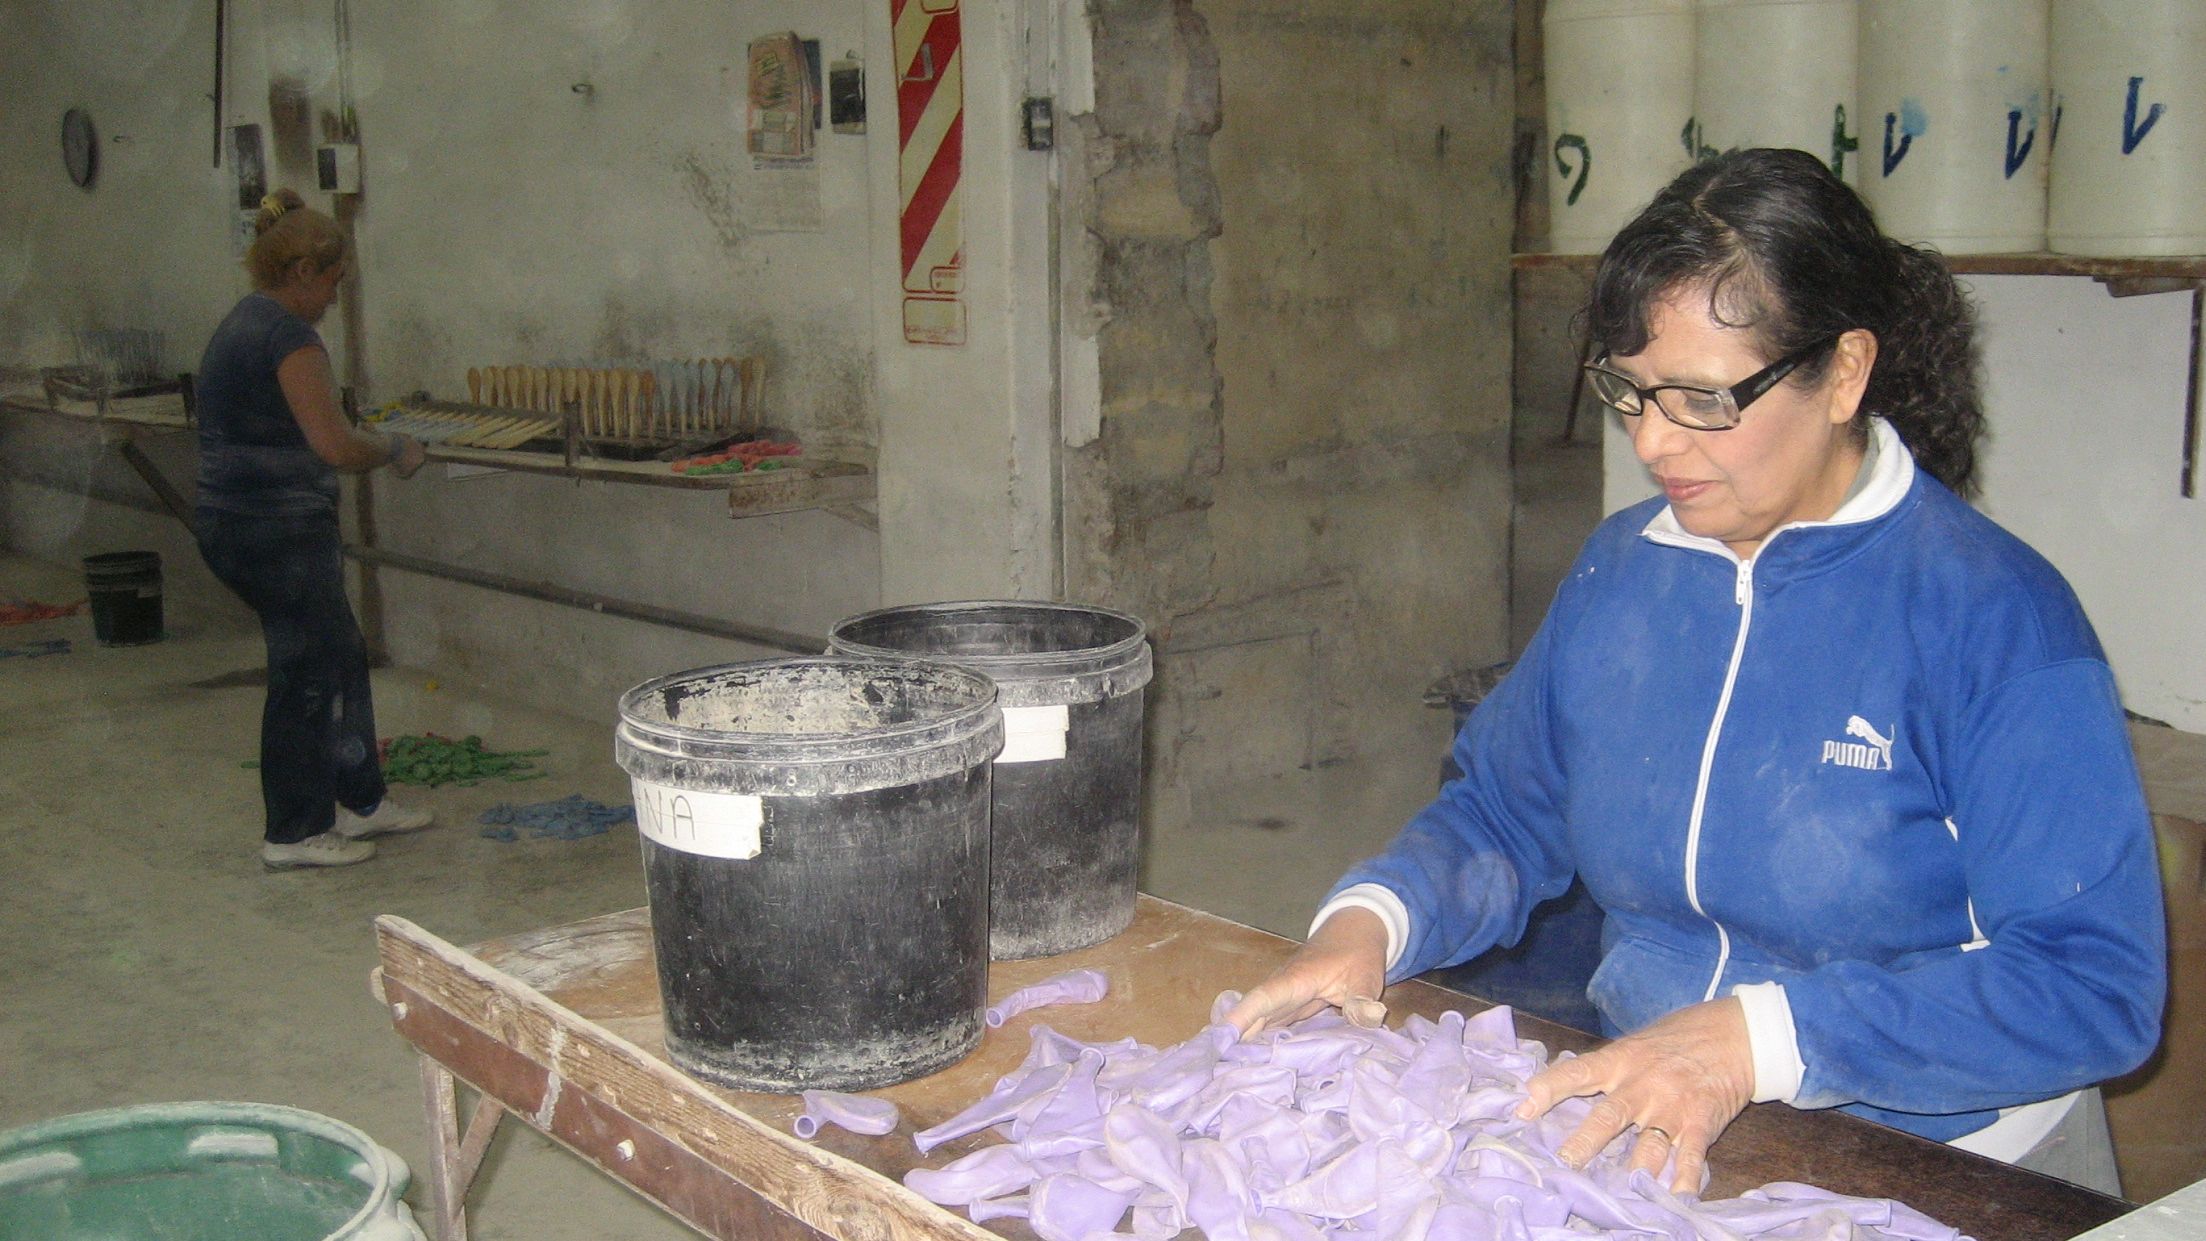 Carmen Perez, a balloon factory supervisor in Buenos Aires, says: "Before, we couldn't buy anything. And now we can. "